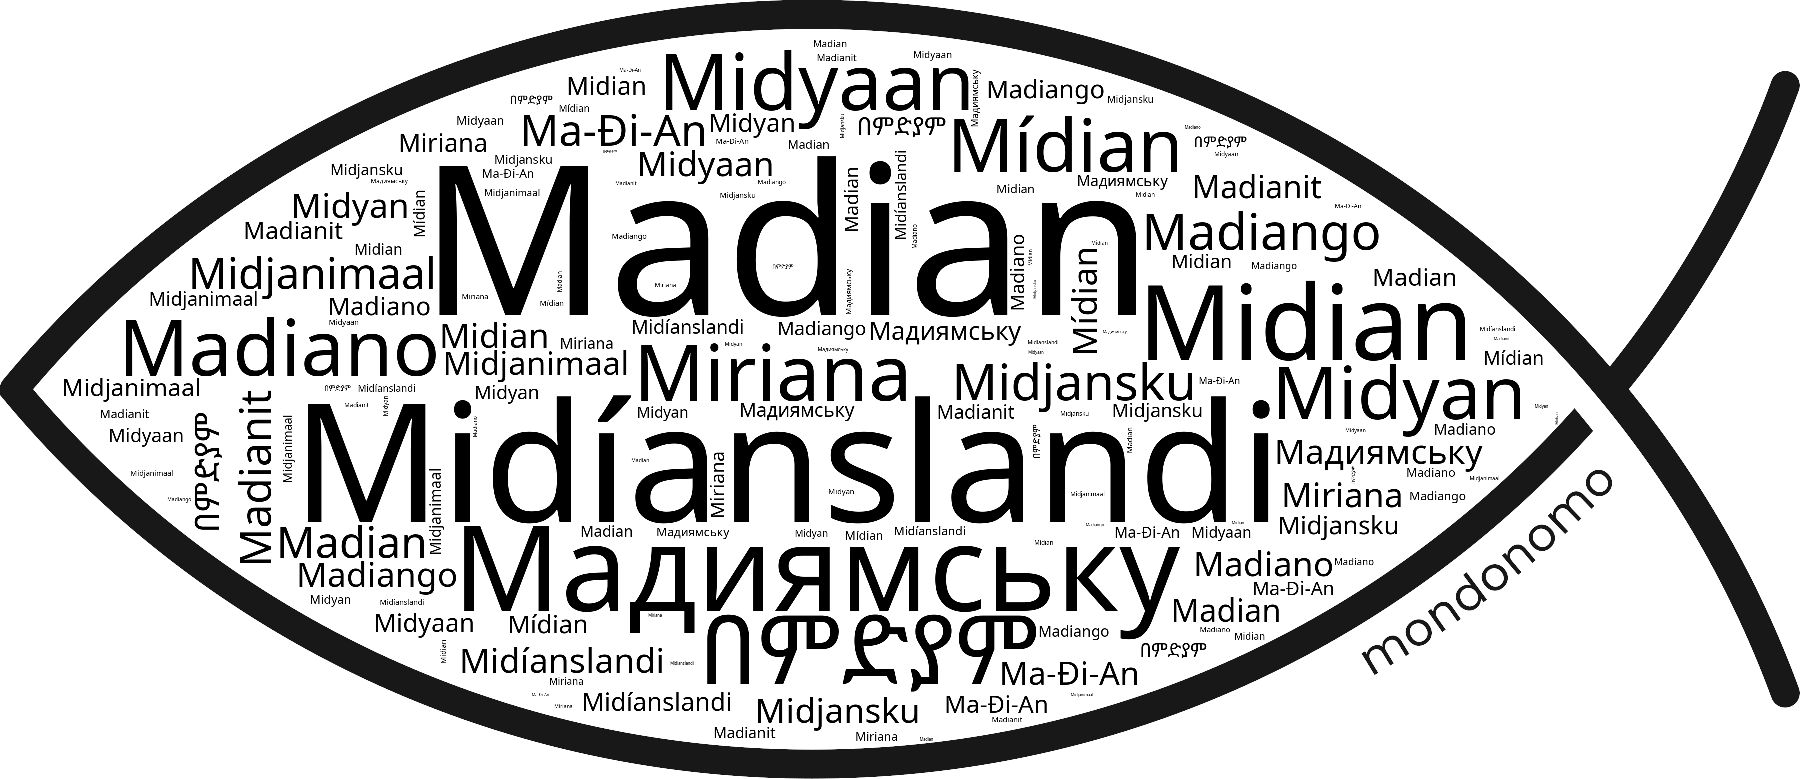 Name Madian in the world's Bibles